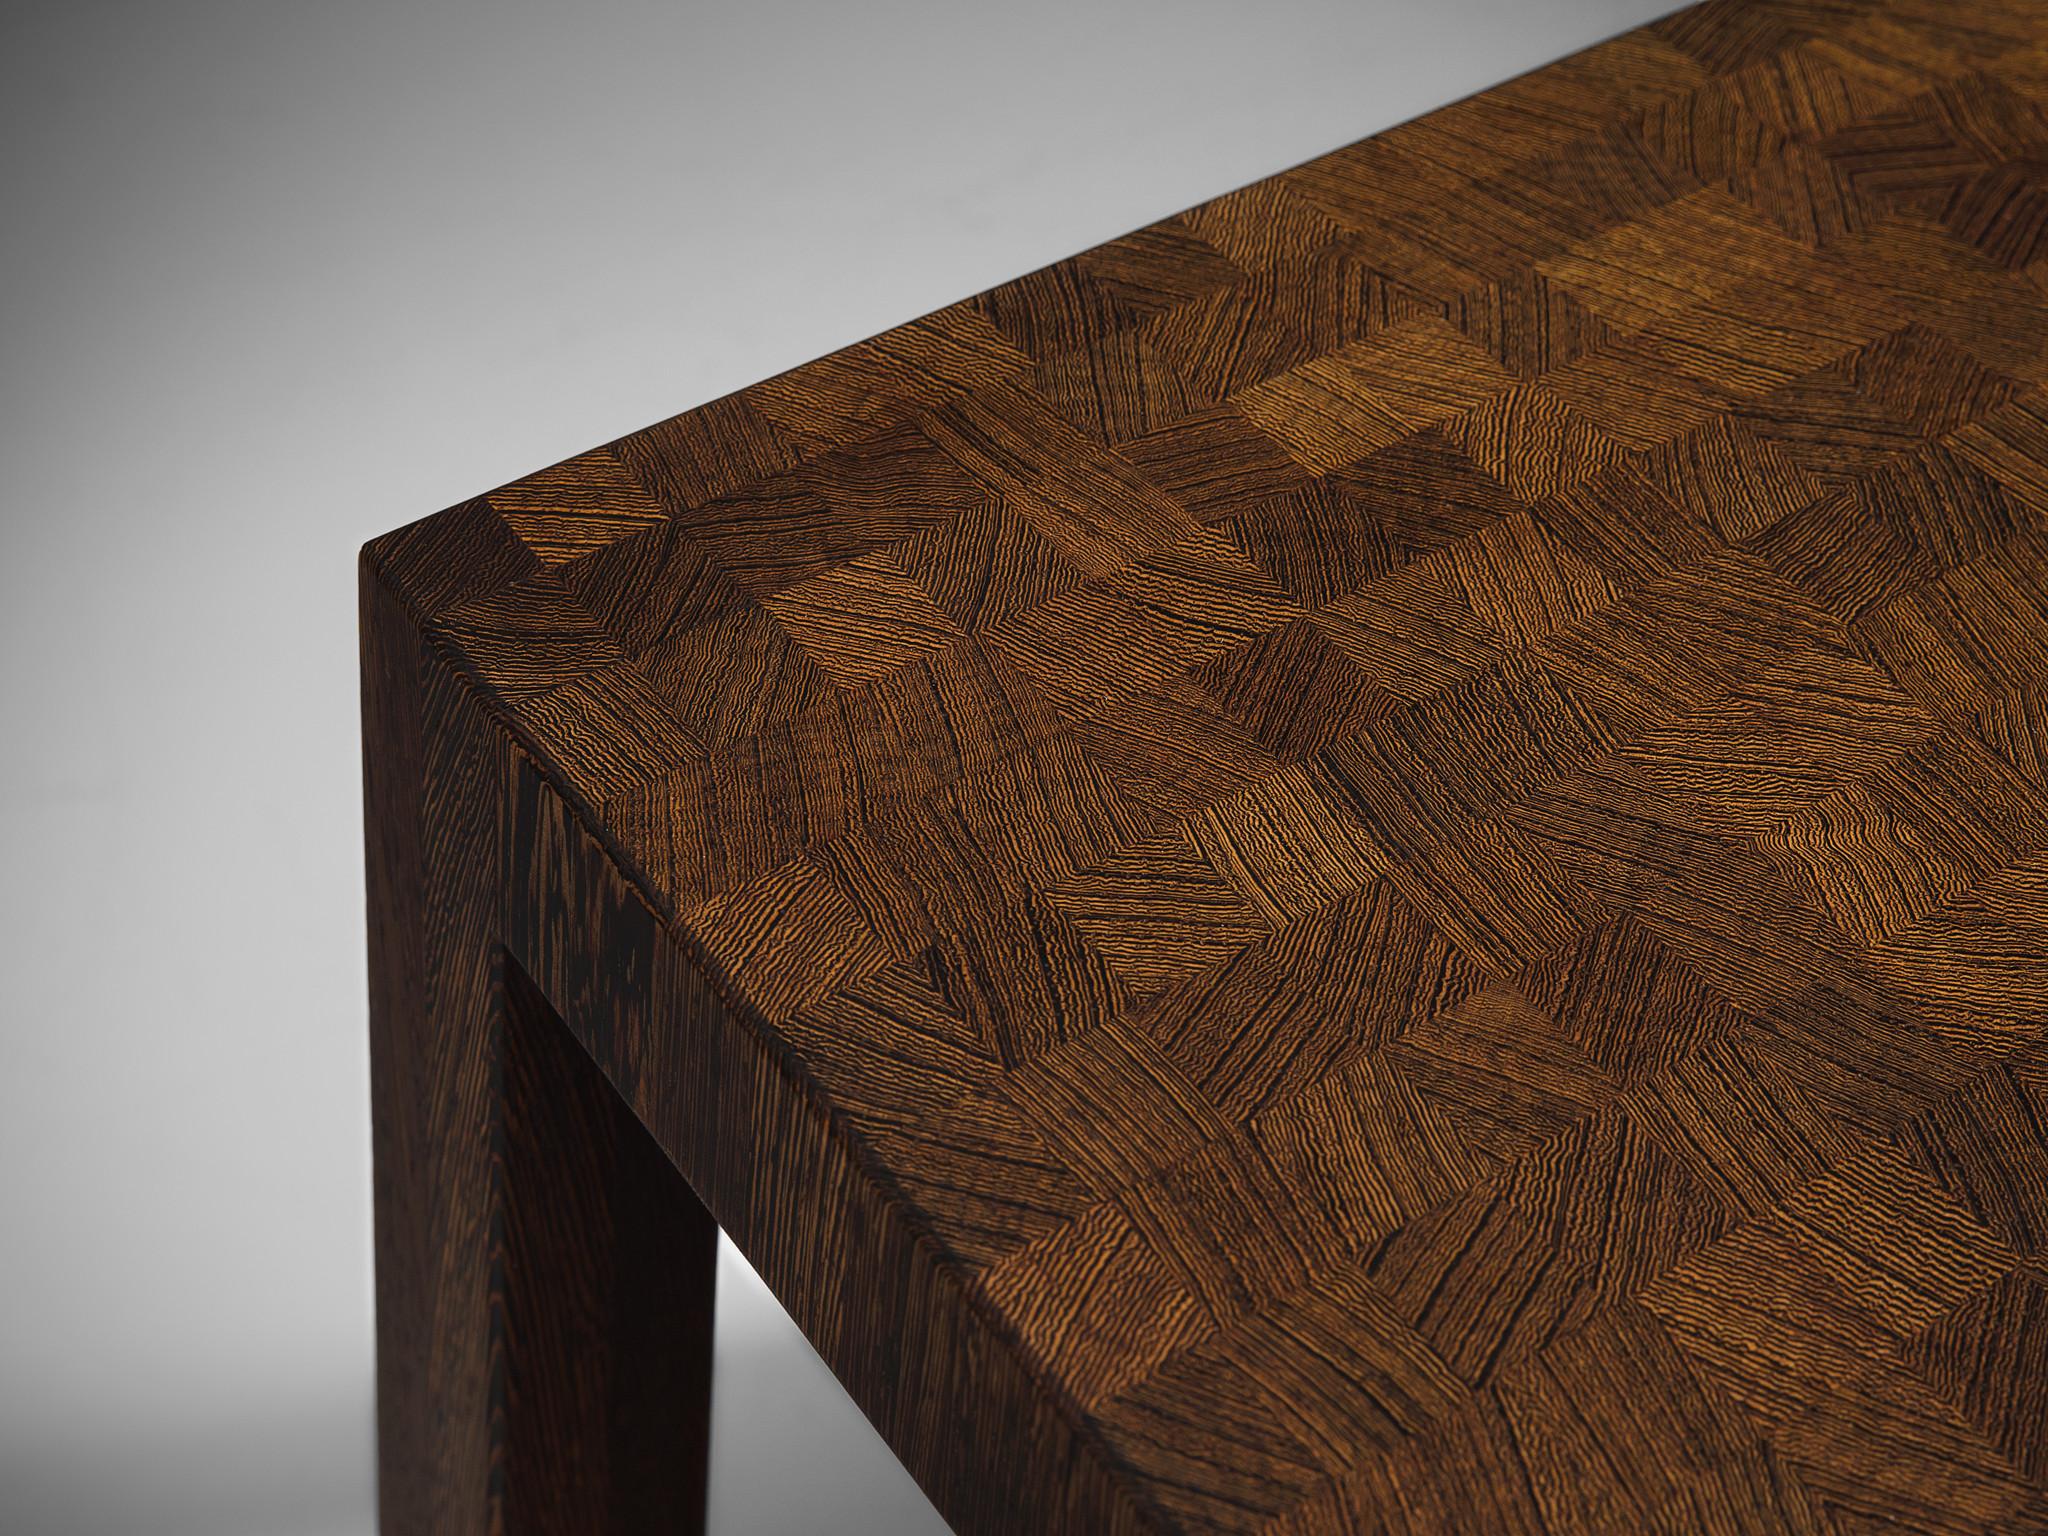 Jules Wabbes, side table, wengé, Belgium, circa 1961

Unique square coffee table with end grain wooden top in wengé. The wengé squares are creating a vibrant and geometric appearance in the warm color of the wood. The table is executed with two